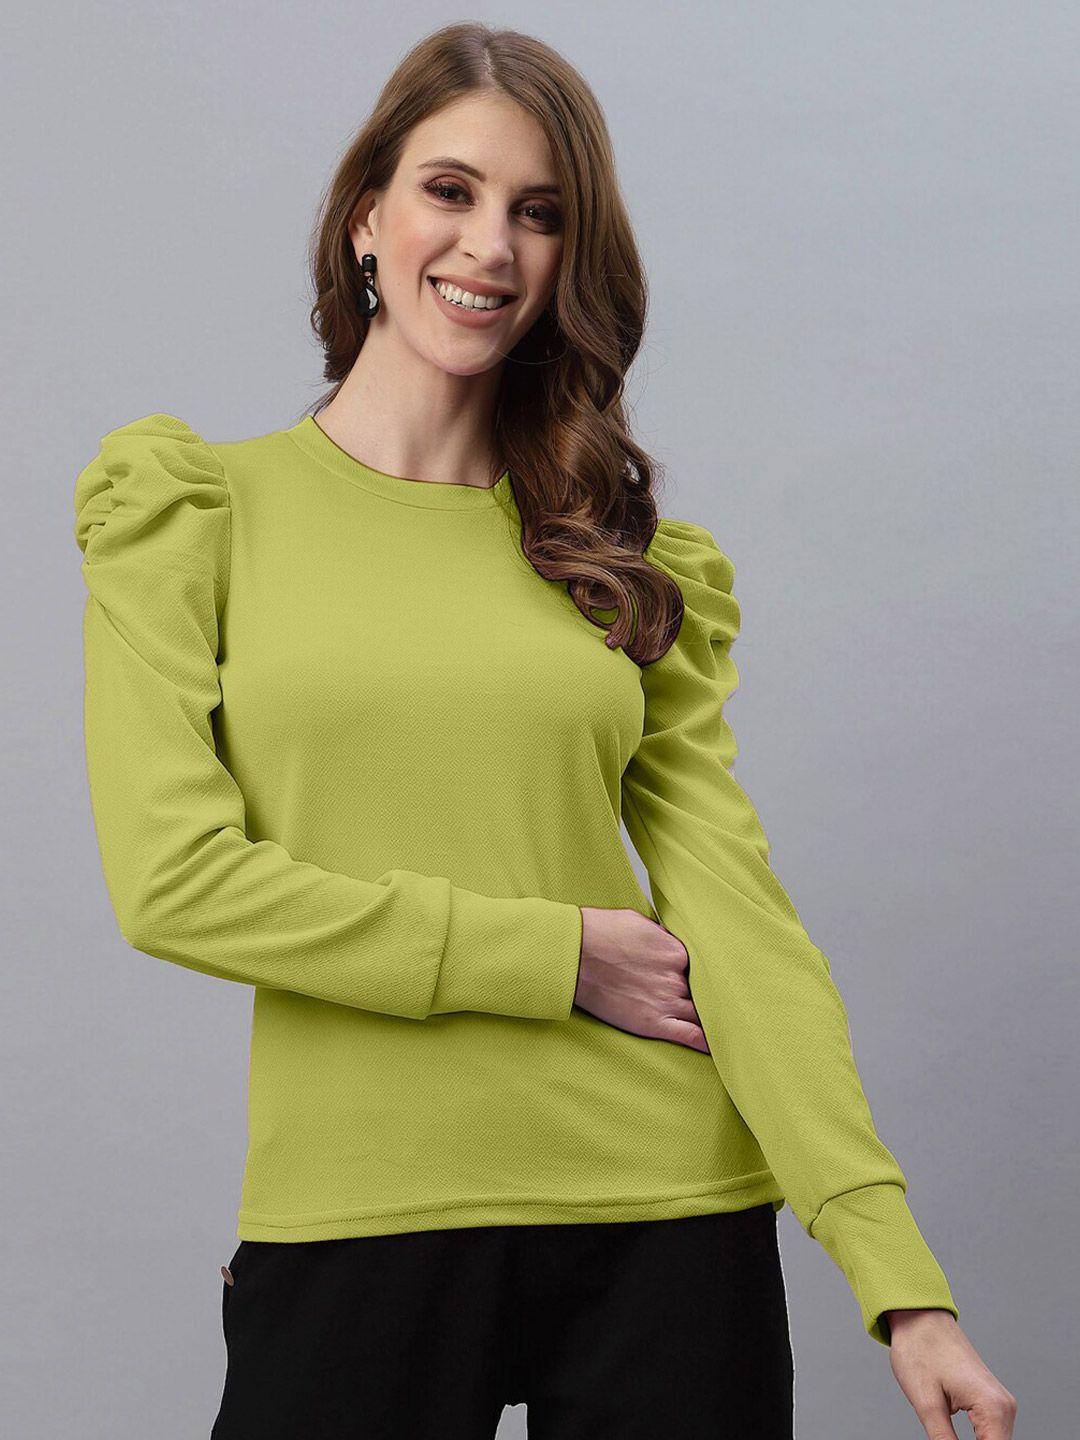 selvia green bishop sleeves scuba lace top